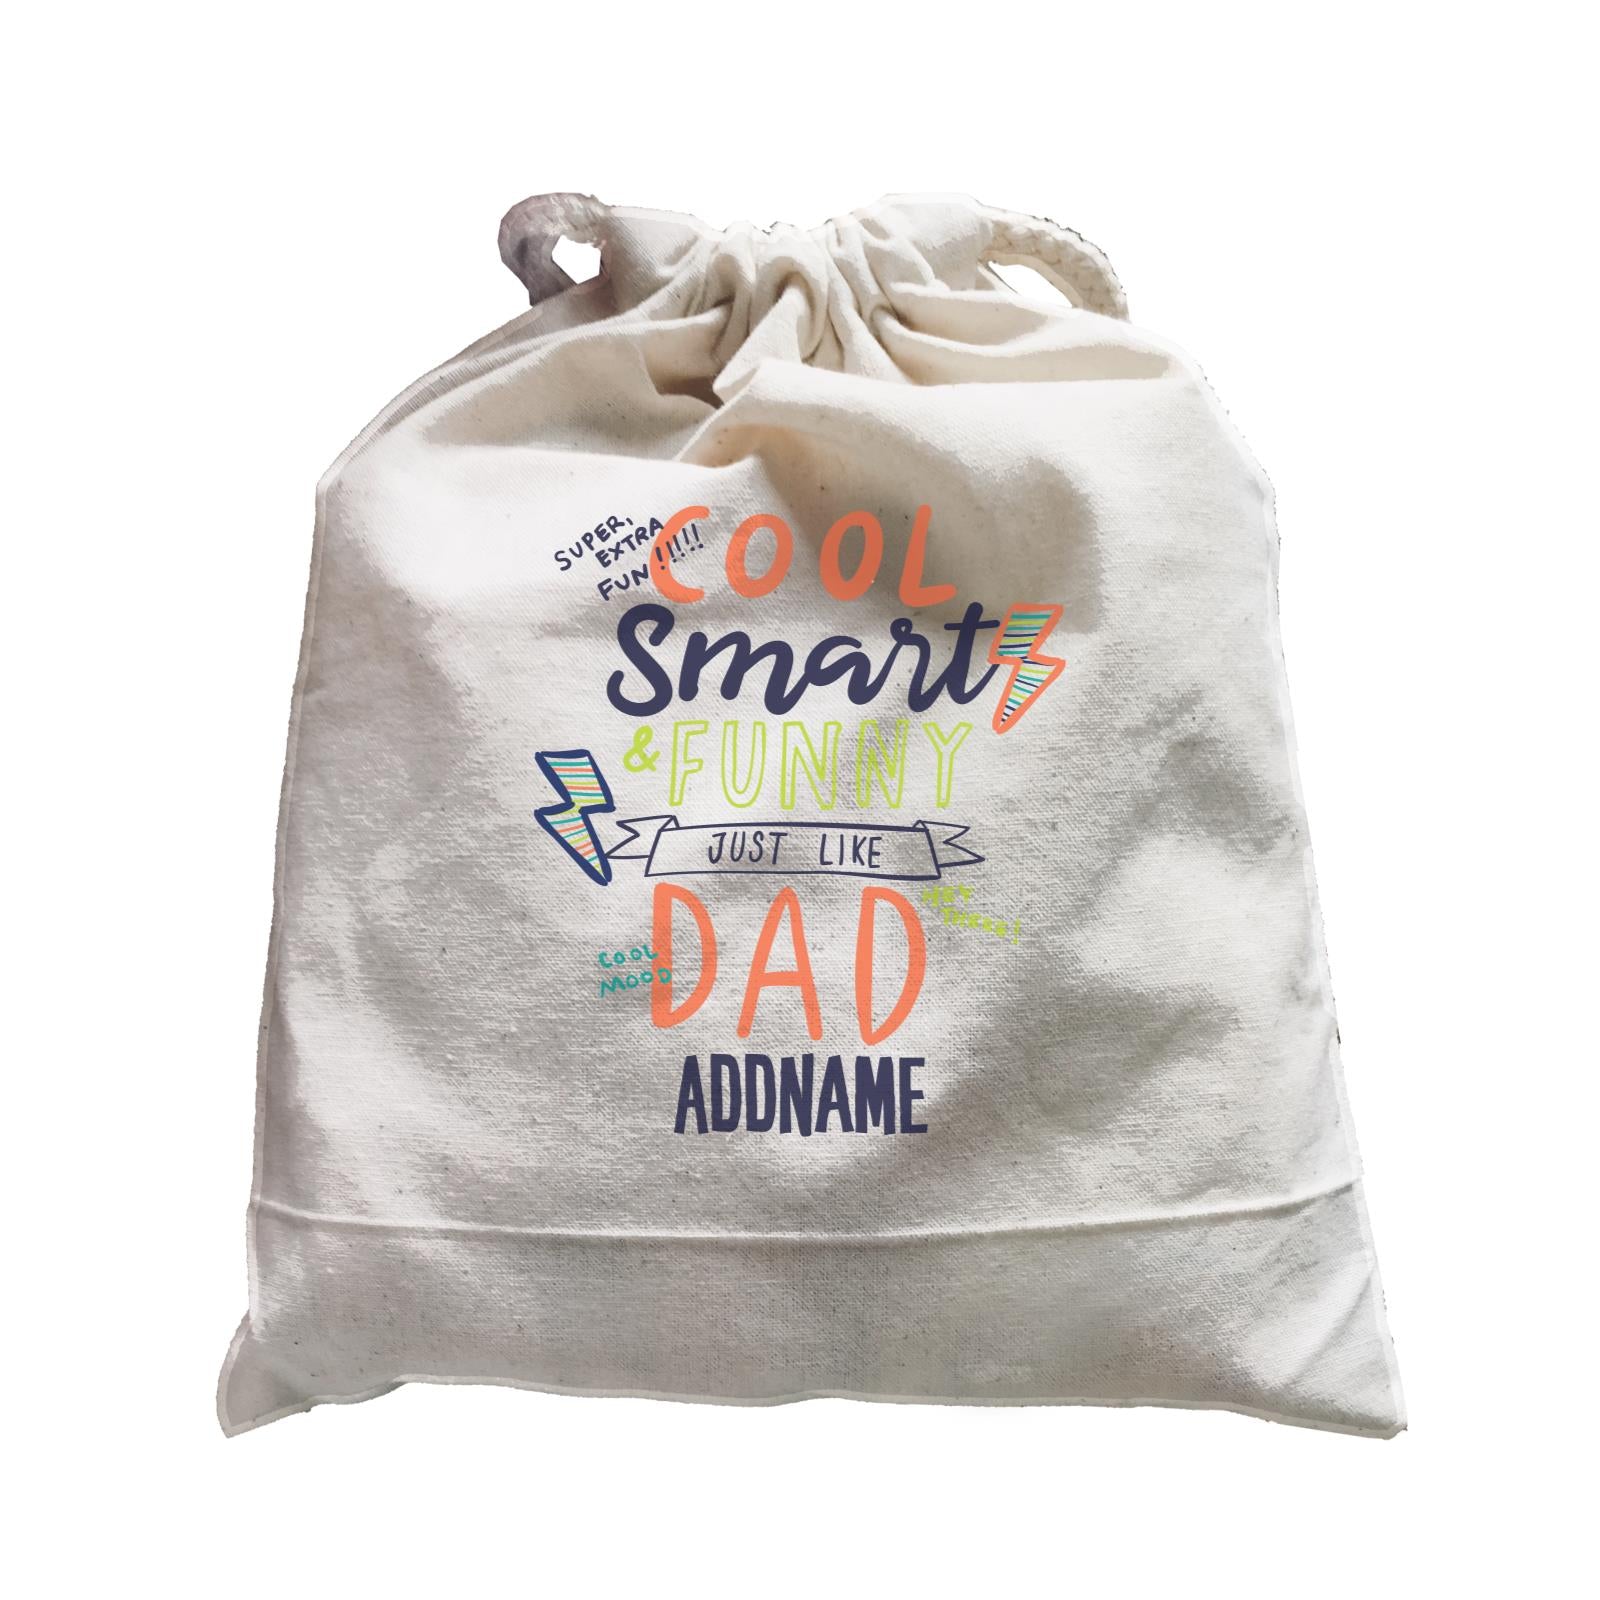 Cool Vibrant Series Cool Smart Funny Just Like Dad Addname Satchel